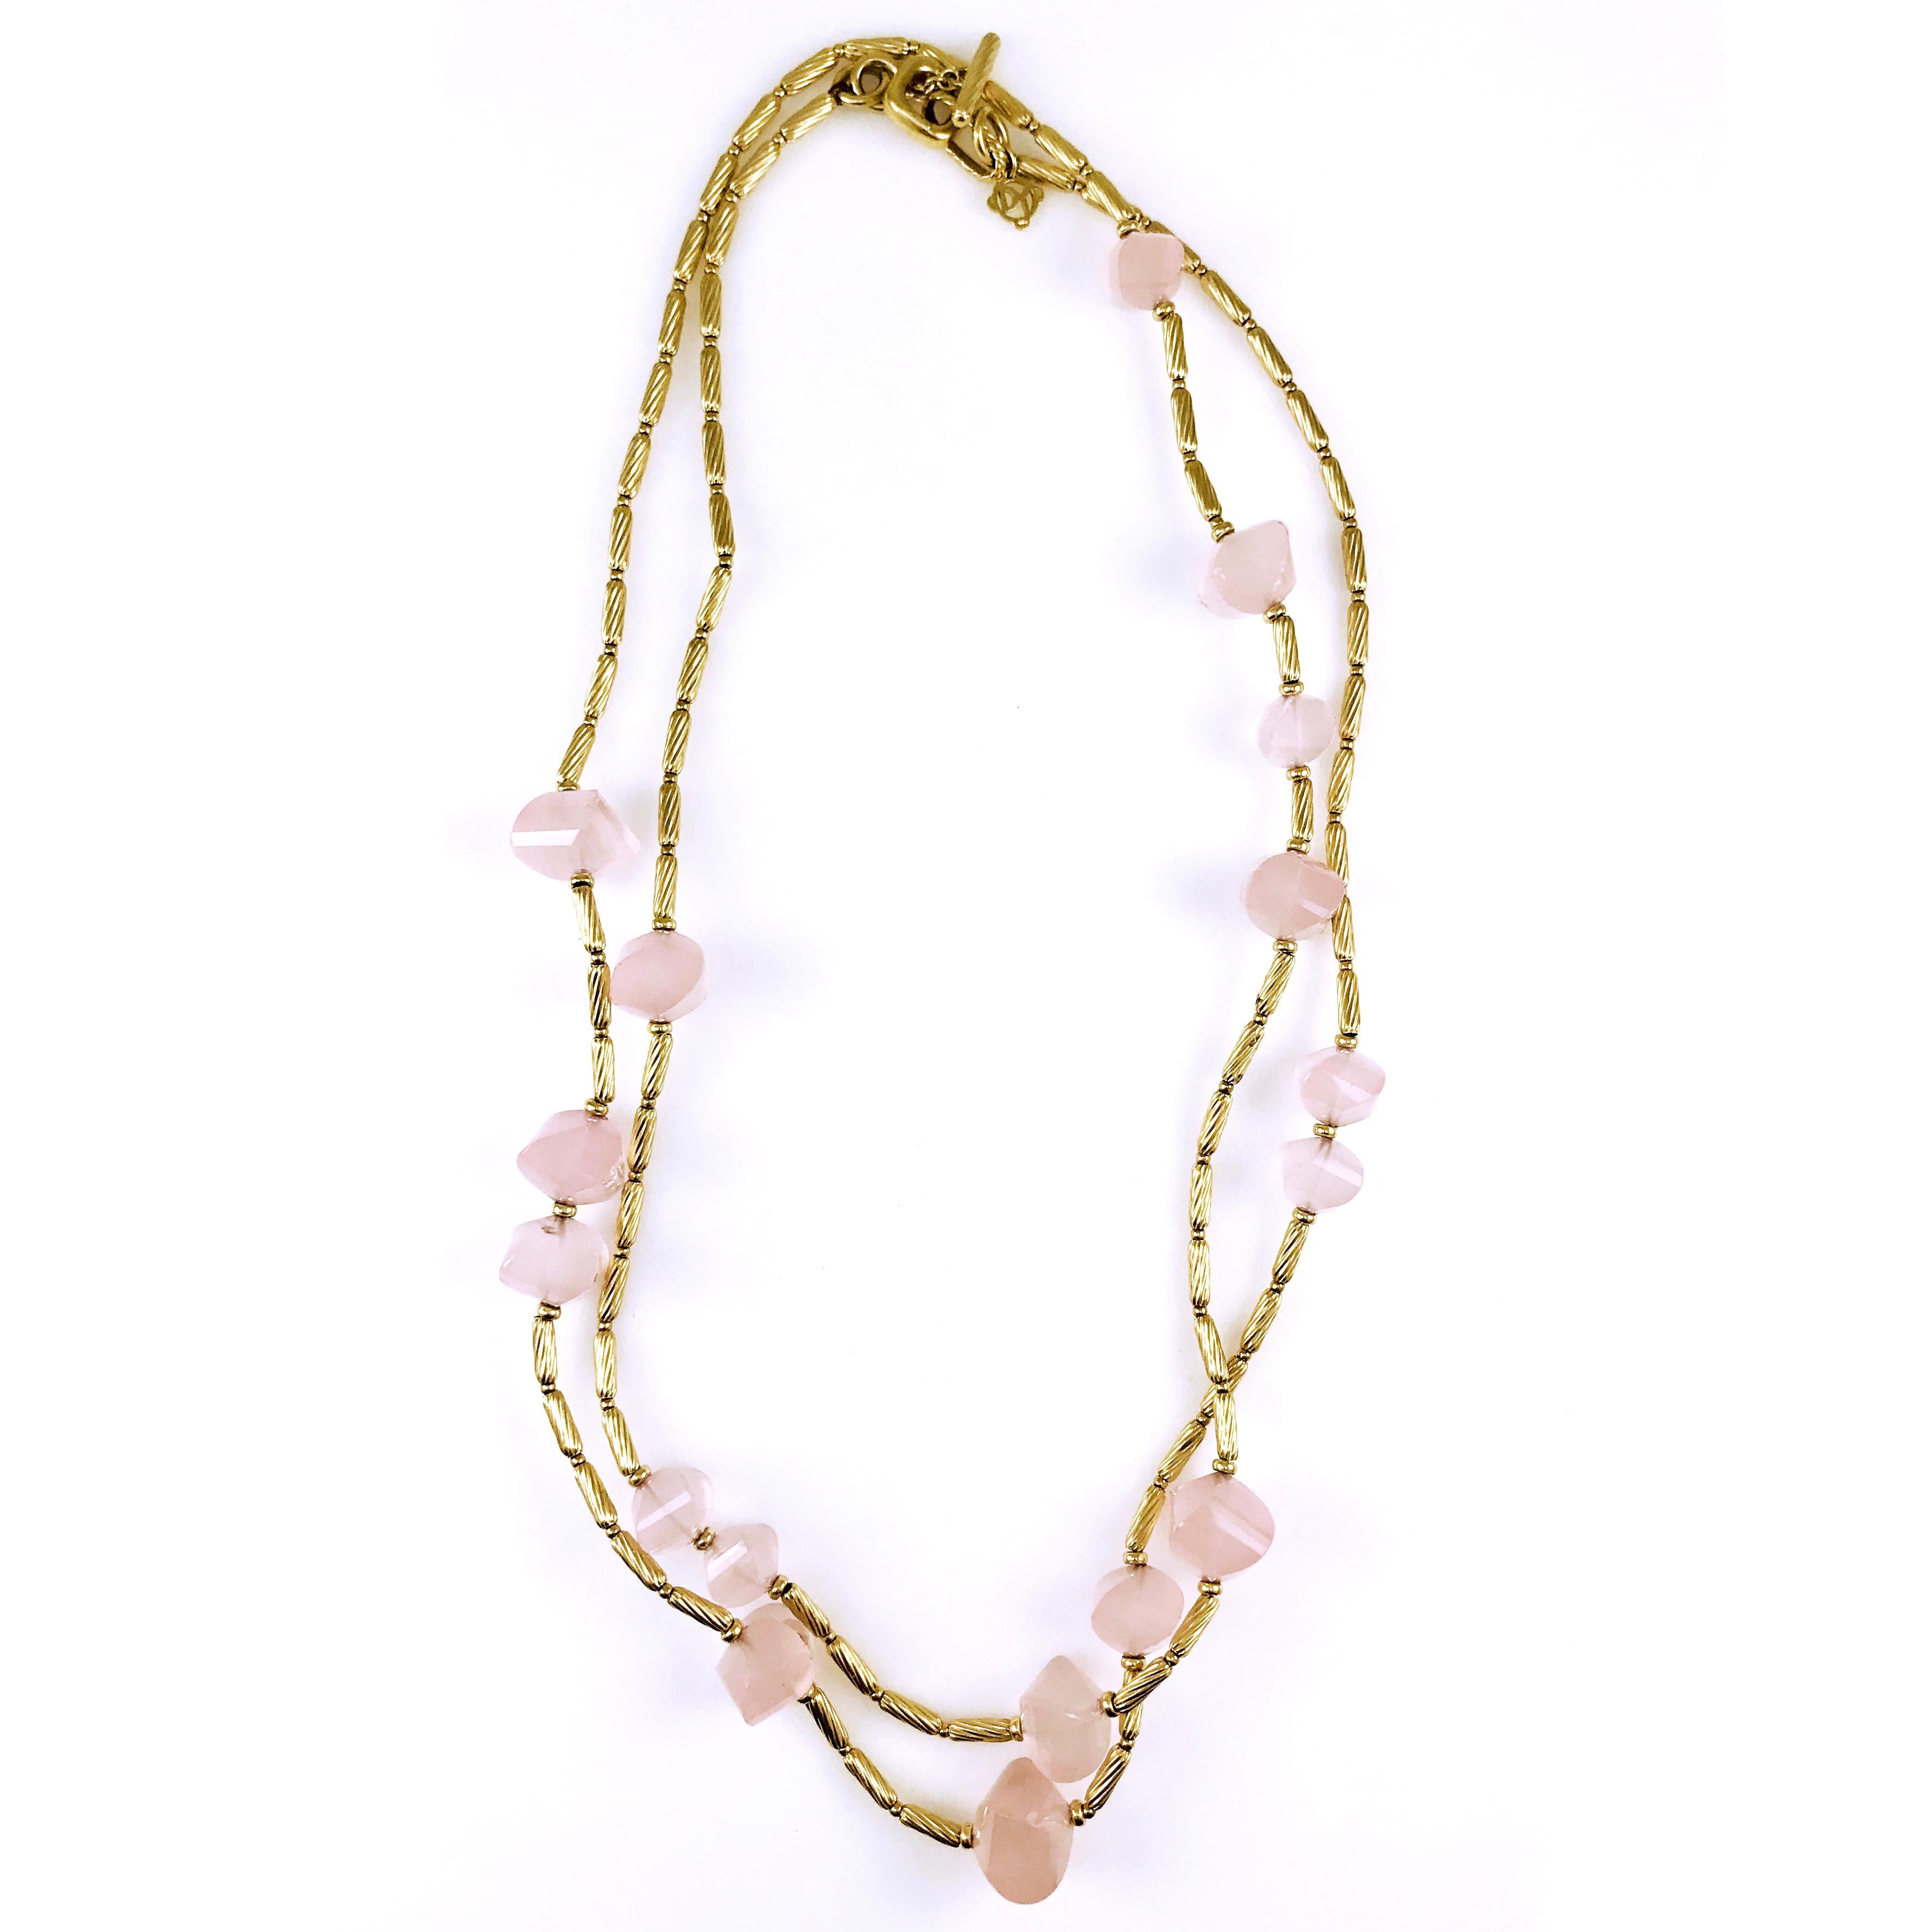 David Yurman 18 Karat Yellow Gold and Rose Quartz Necklace. The designer necklace features tubular twisted cable and round bead and rose quartz beads. The length of the necklace is 44'' and it has a toggle clasp. The faceted Rose Quartz beads range